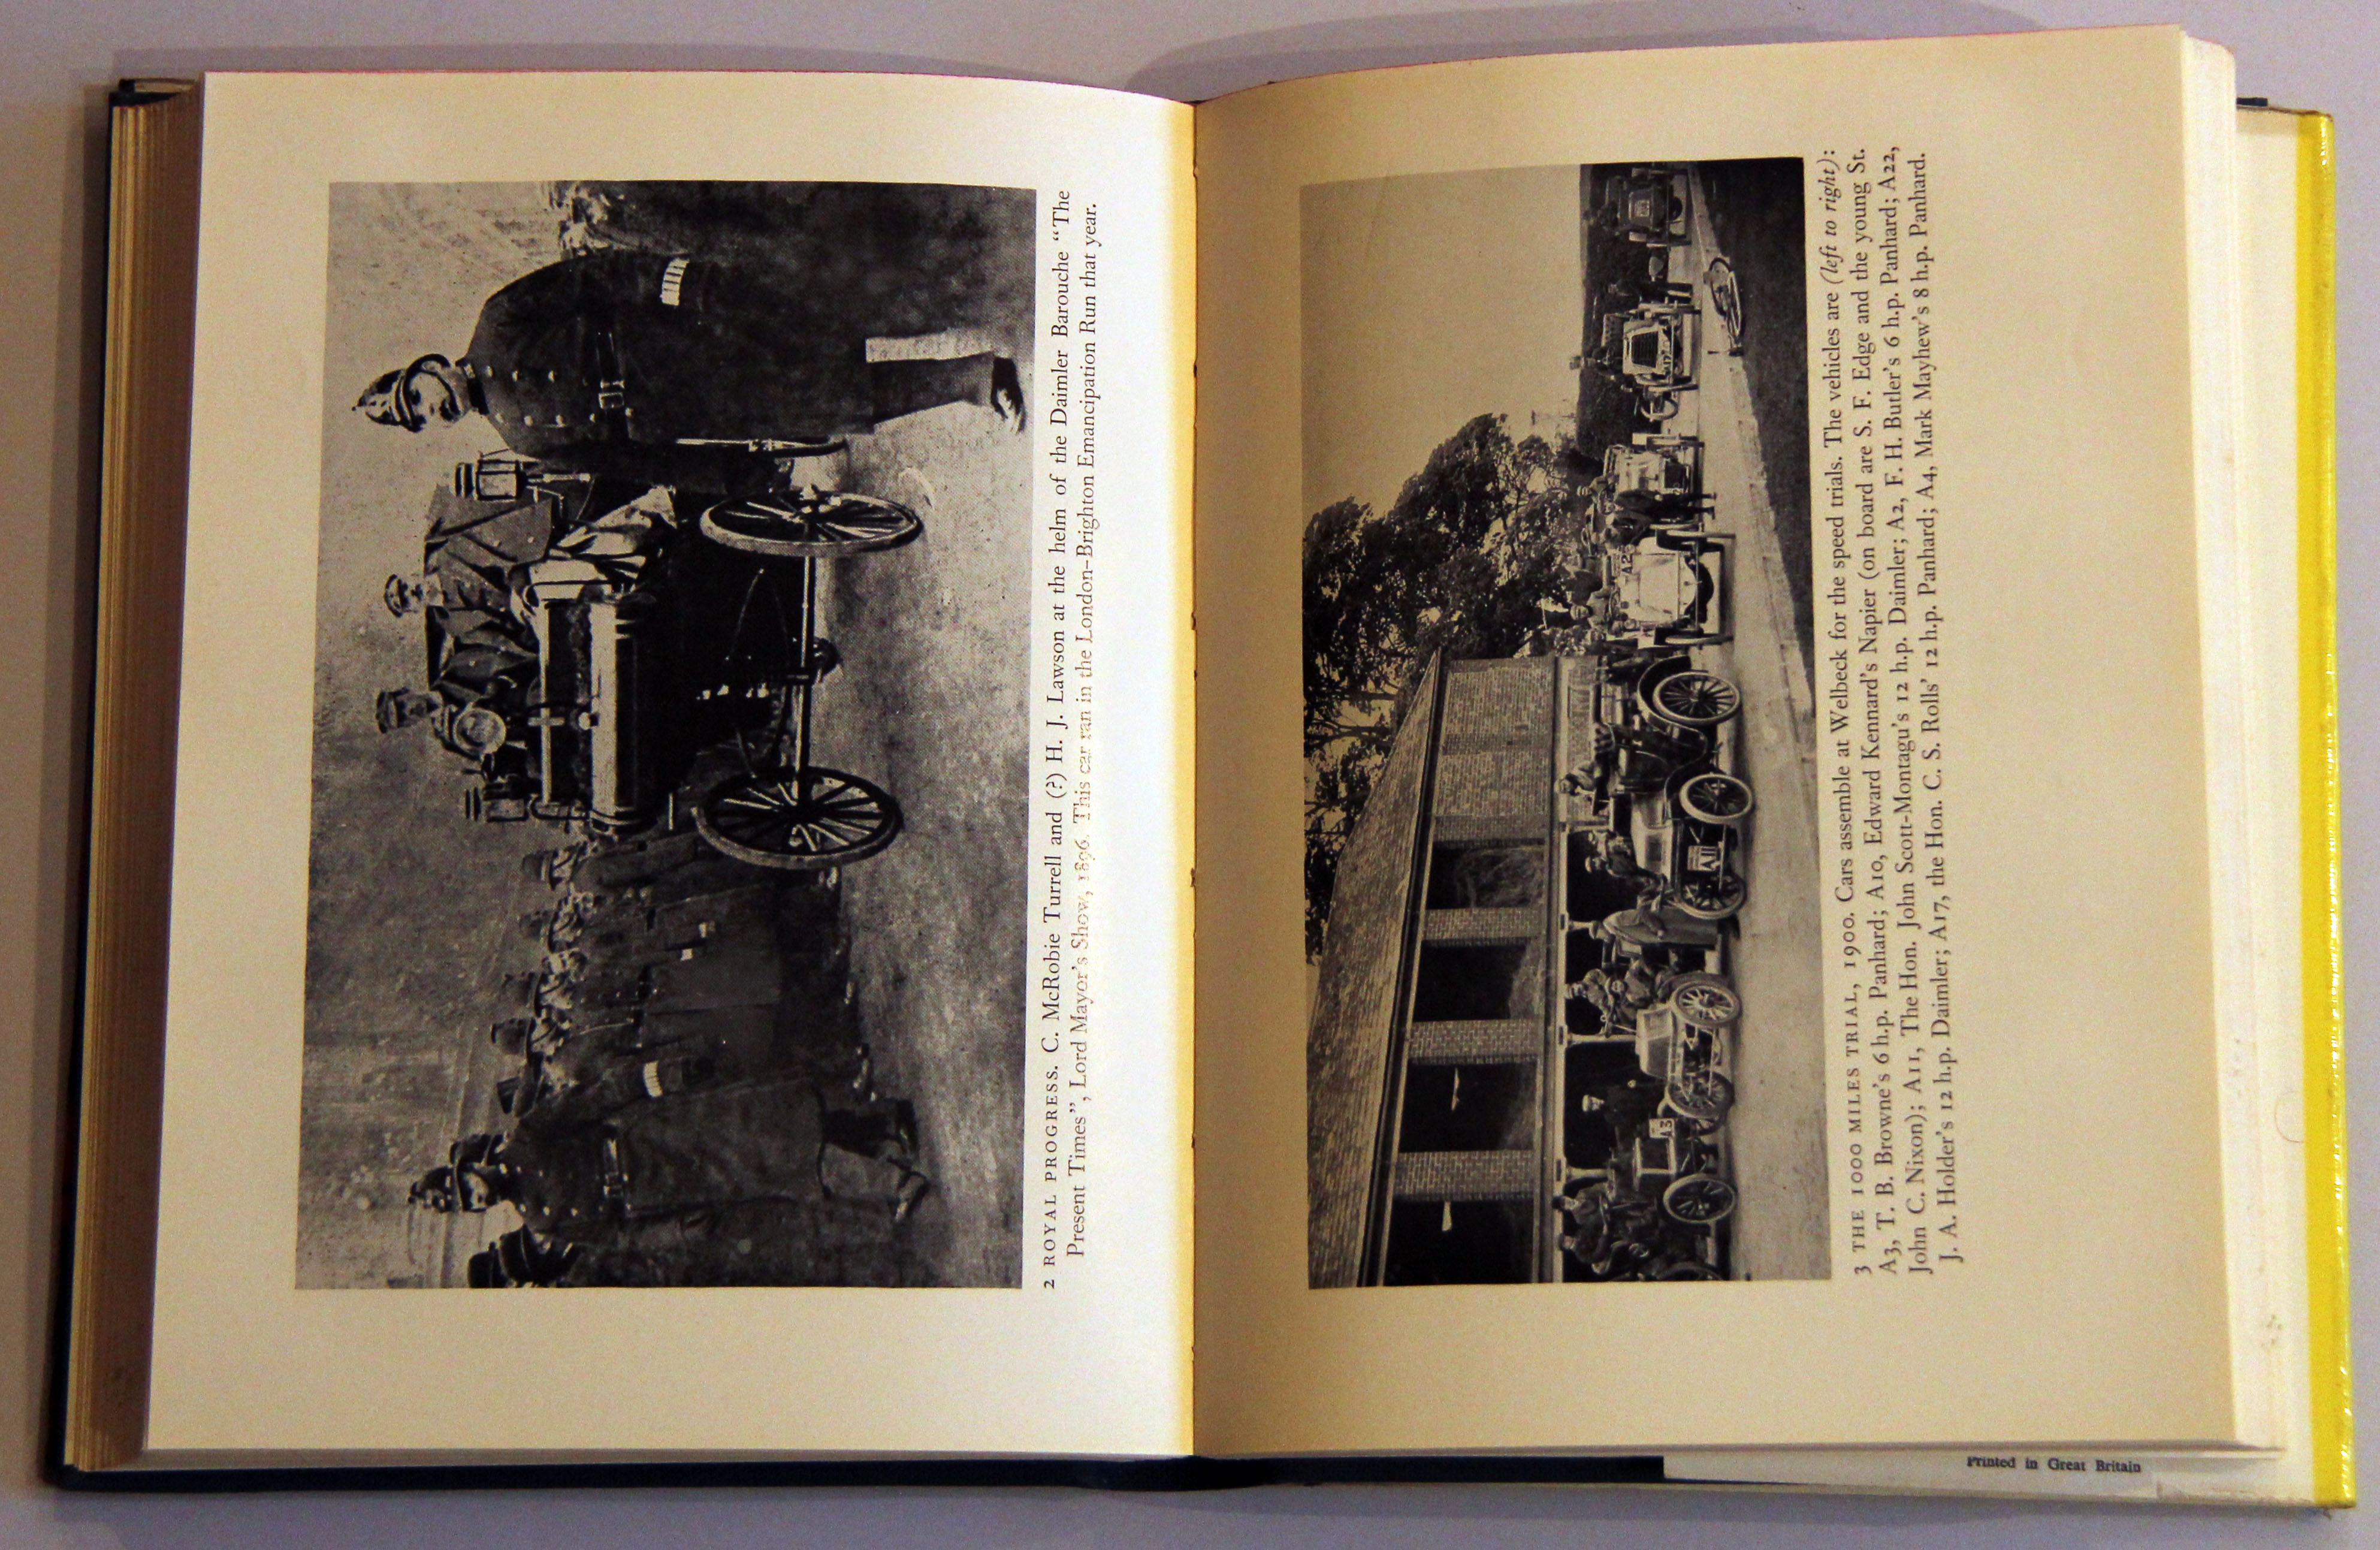 Period Cars by Gianni Rogliatti 1973 illustrated throughout the 318 pages, - Image 6 of 15